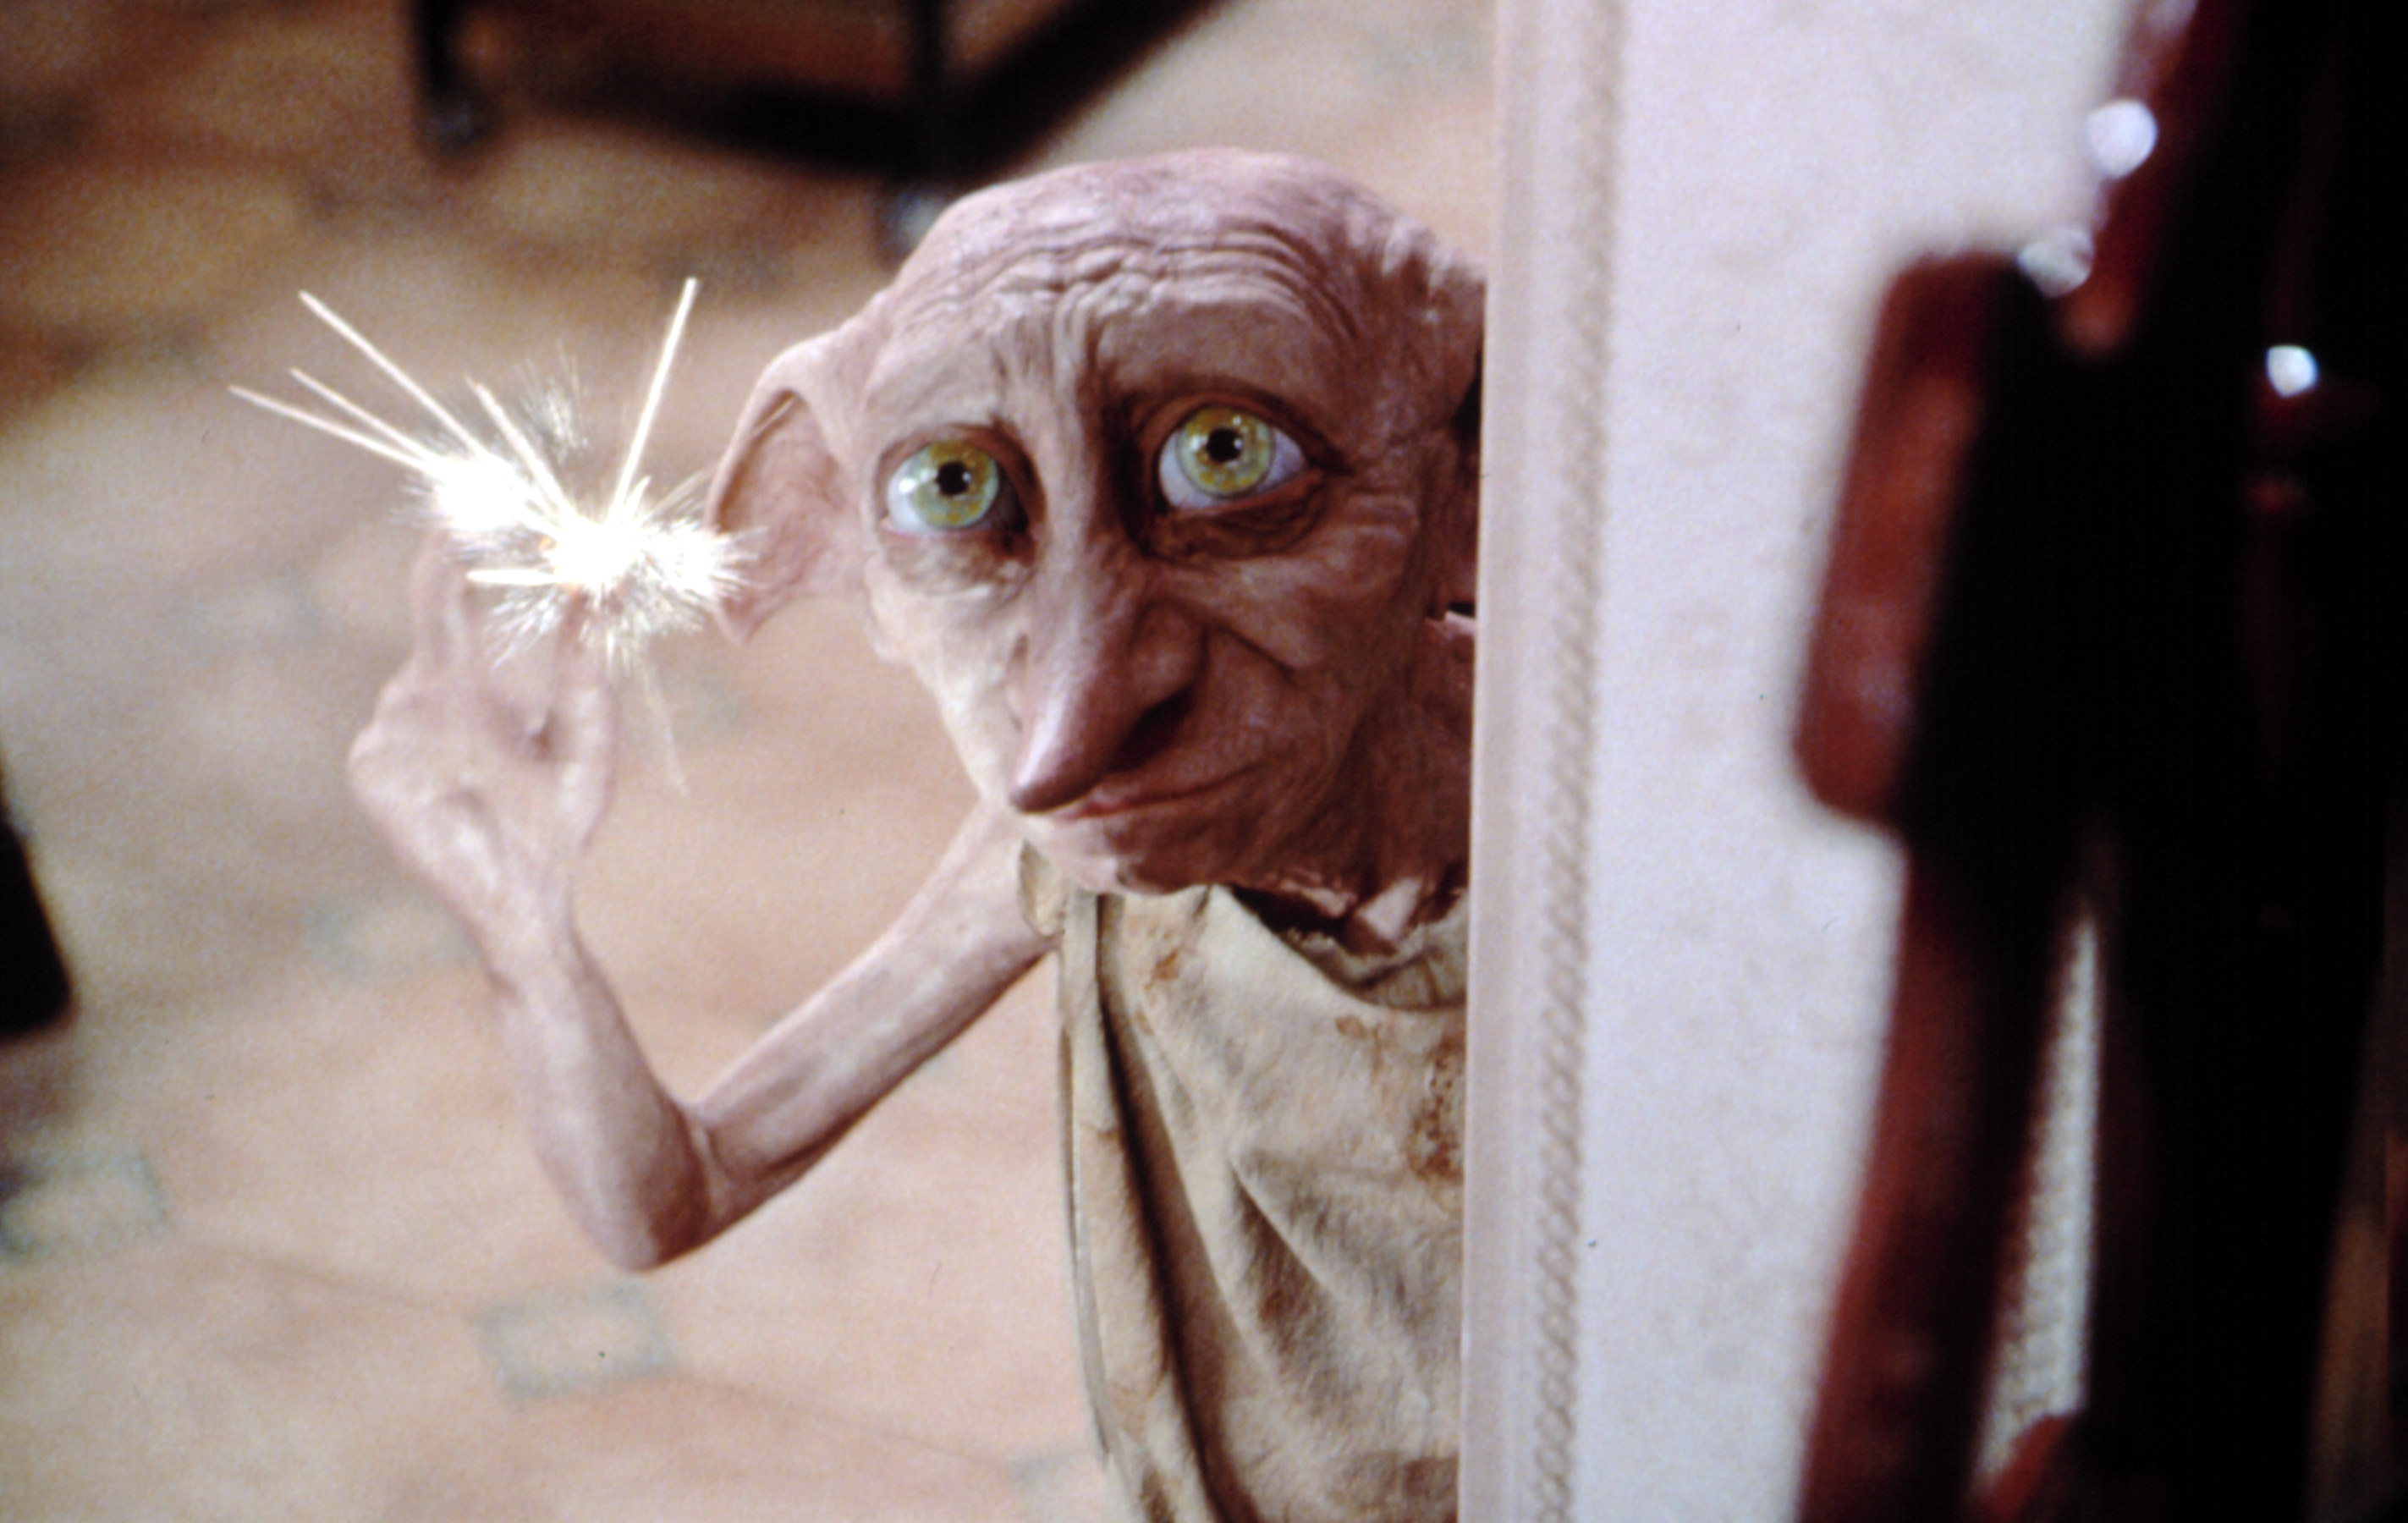 Dobby snapping his fingers and sending sparks into the air